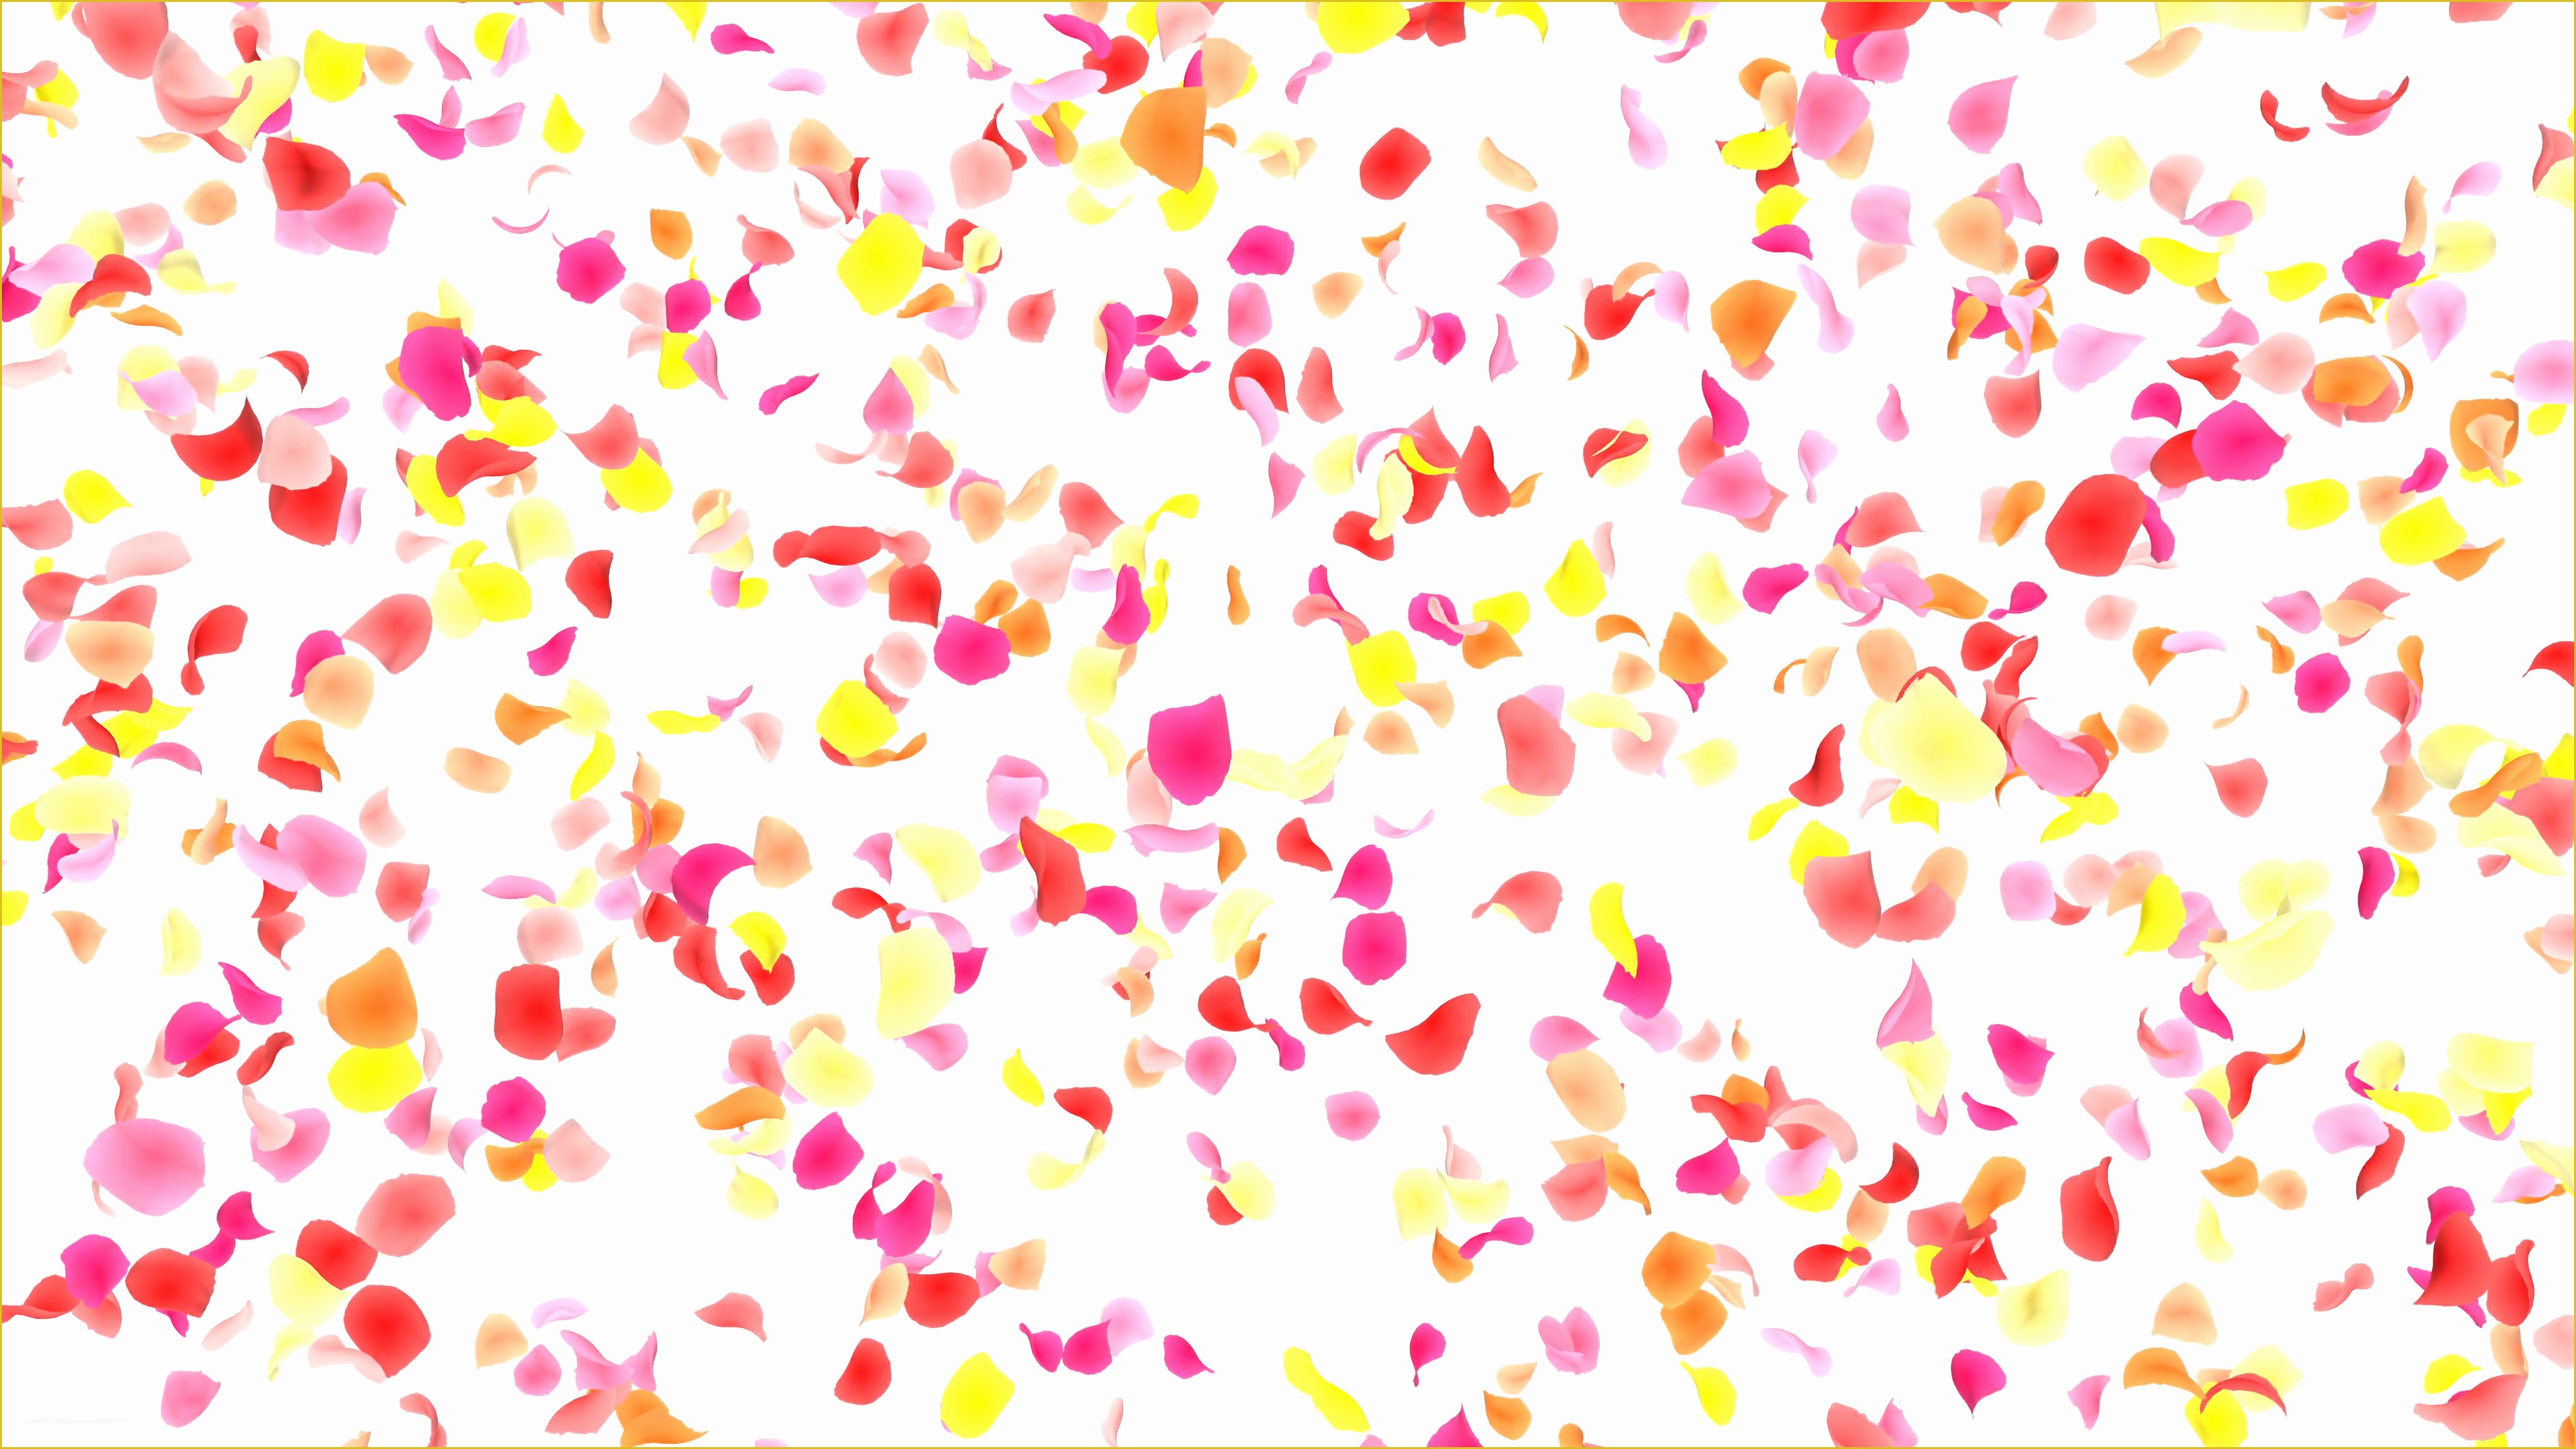 Falling Flower Petals after Effects Template Free Of Flower Petals Pink Falling A 4k Motion Background